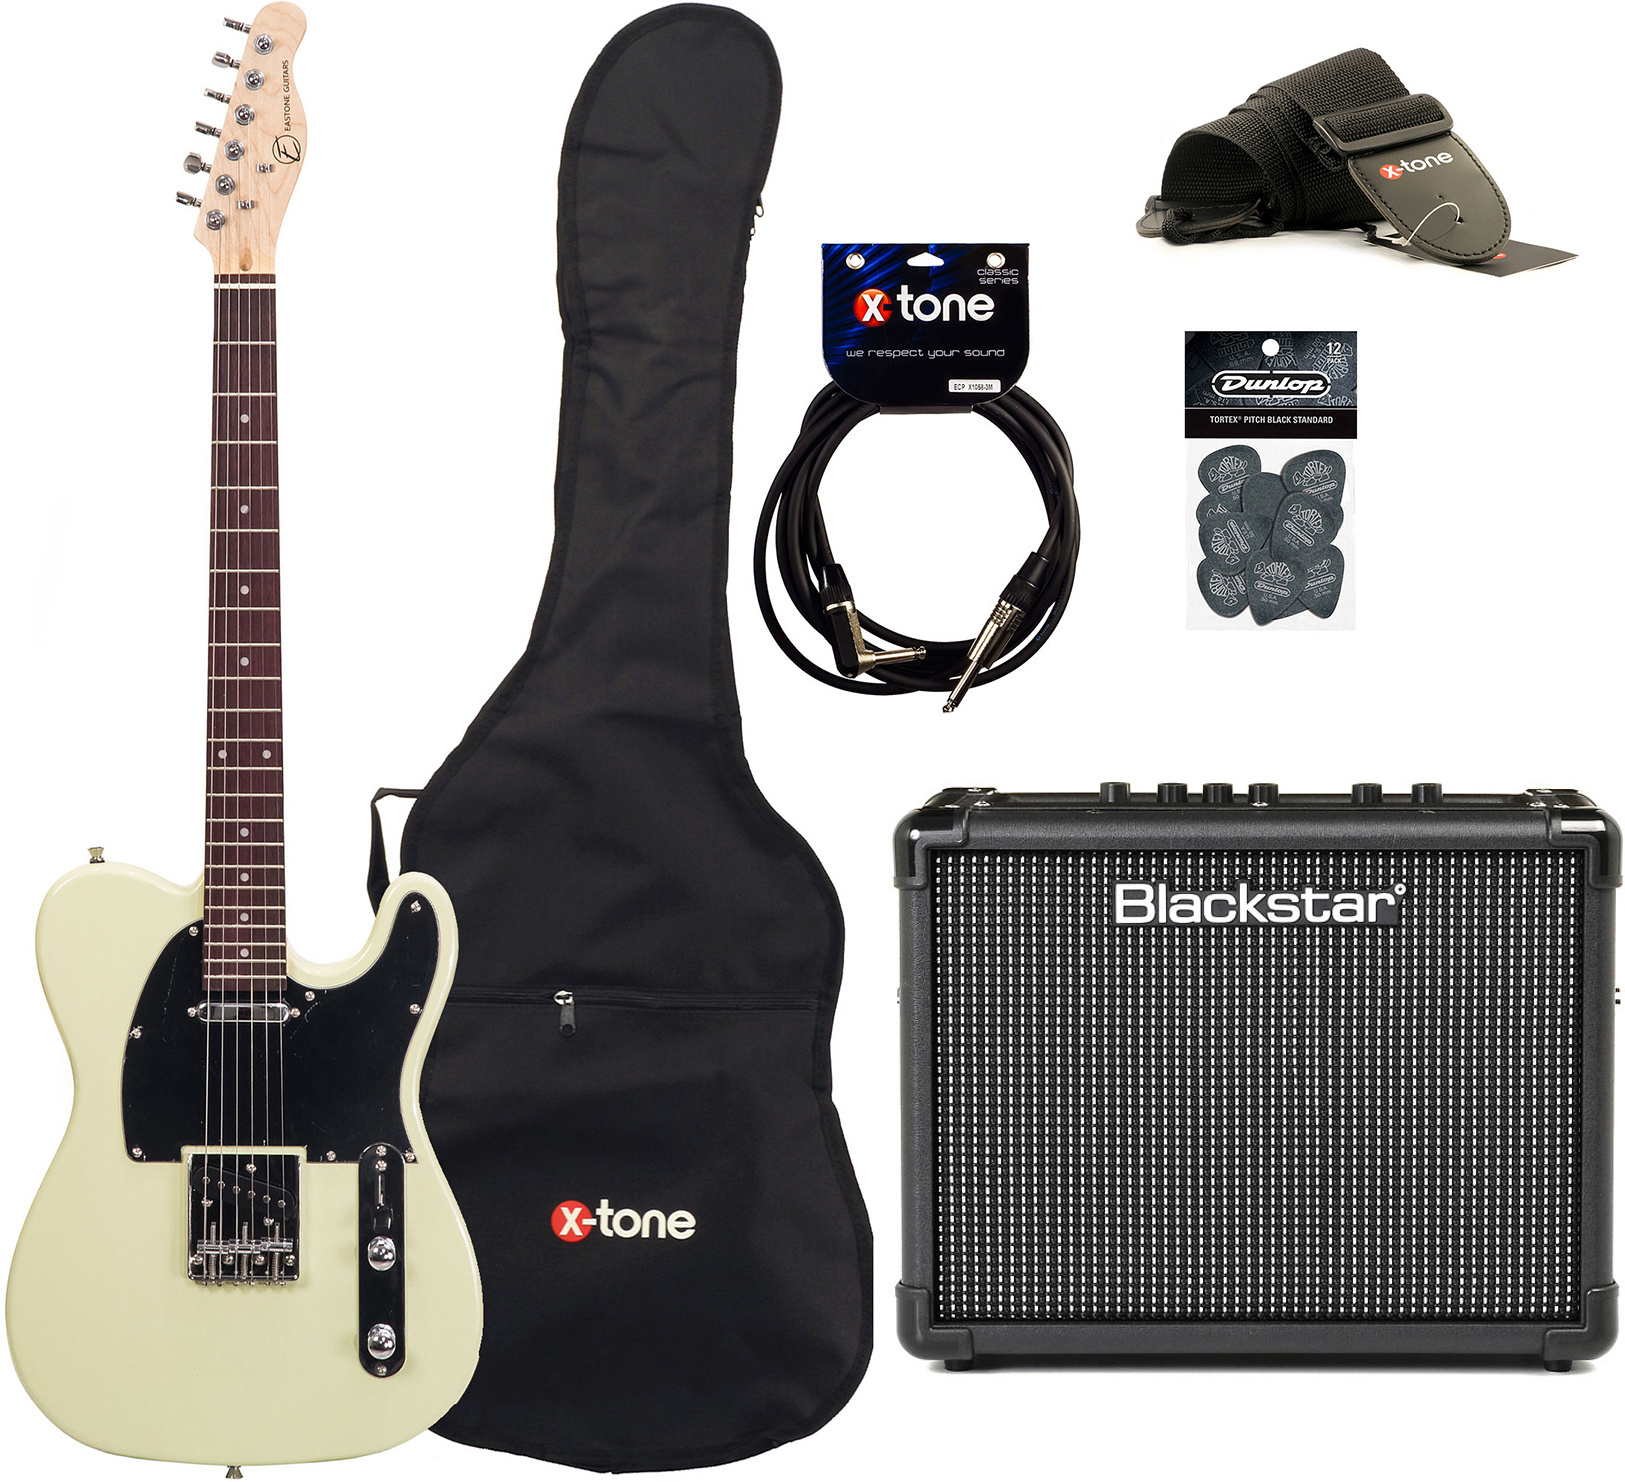 Eastone Tl70 +blackstar Id Core Stereo 10 V3 +cable +housse +courroie +mediators - Ivory - Electric guitar set - Main picture